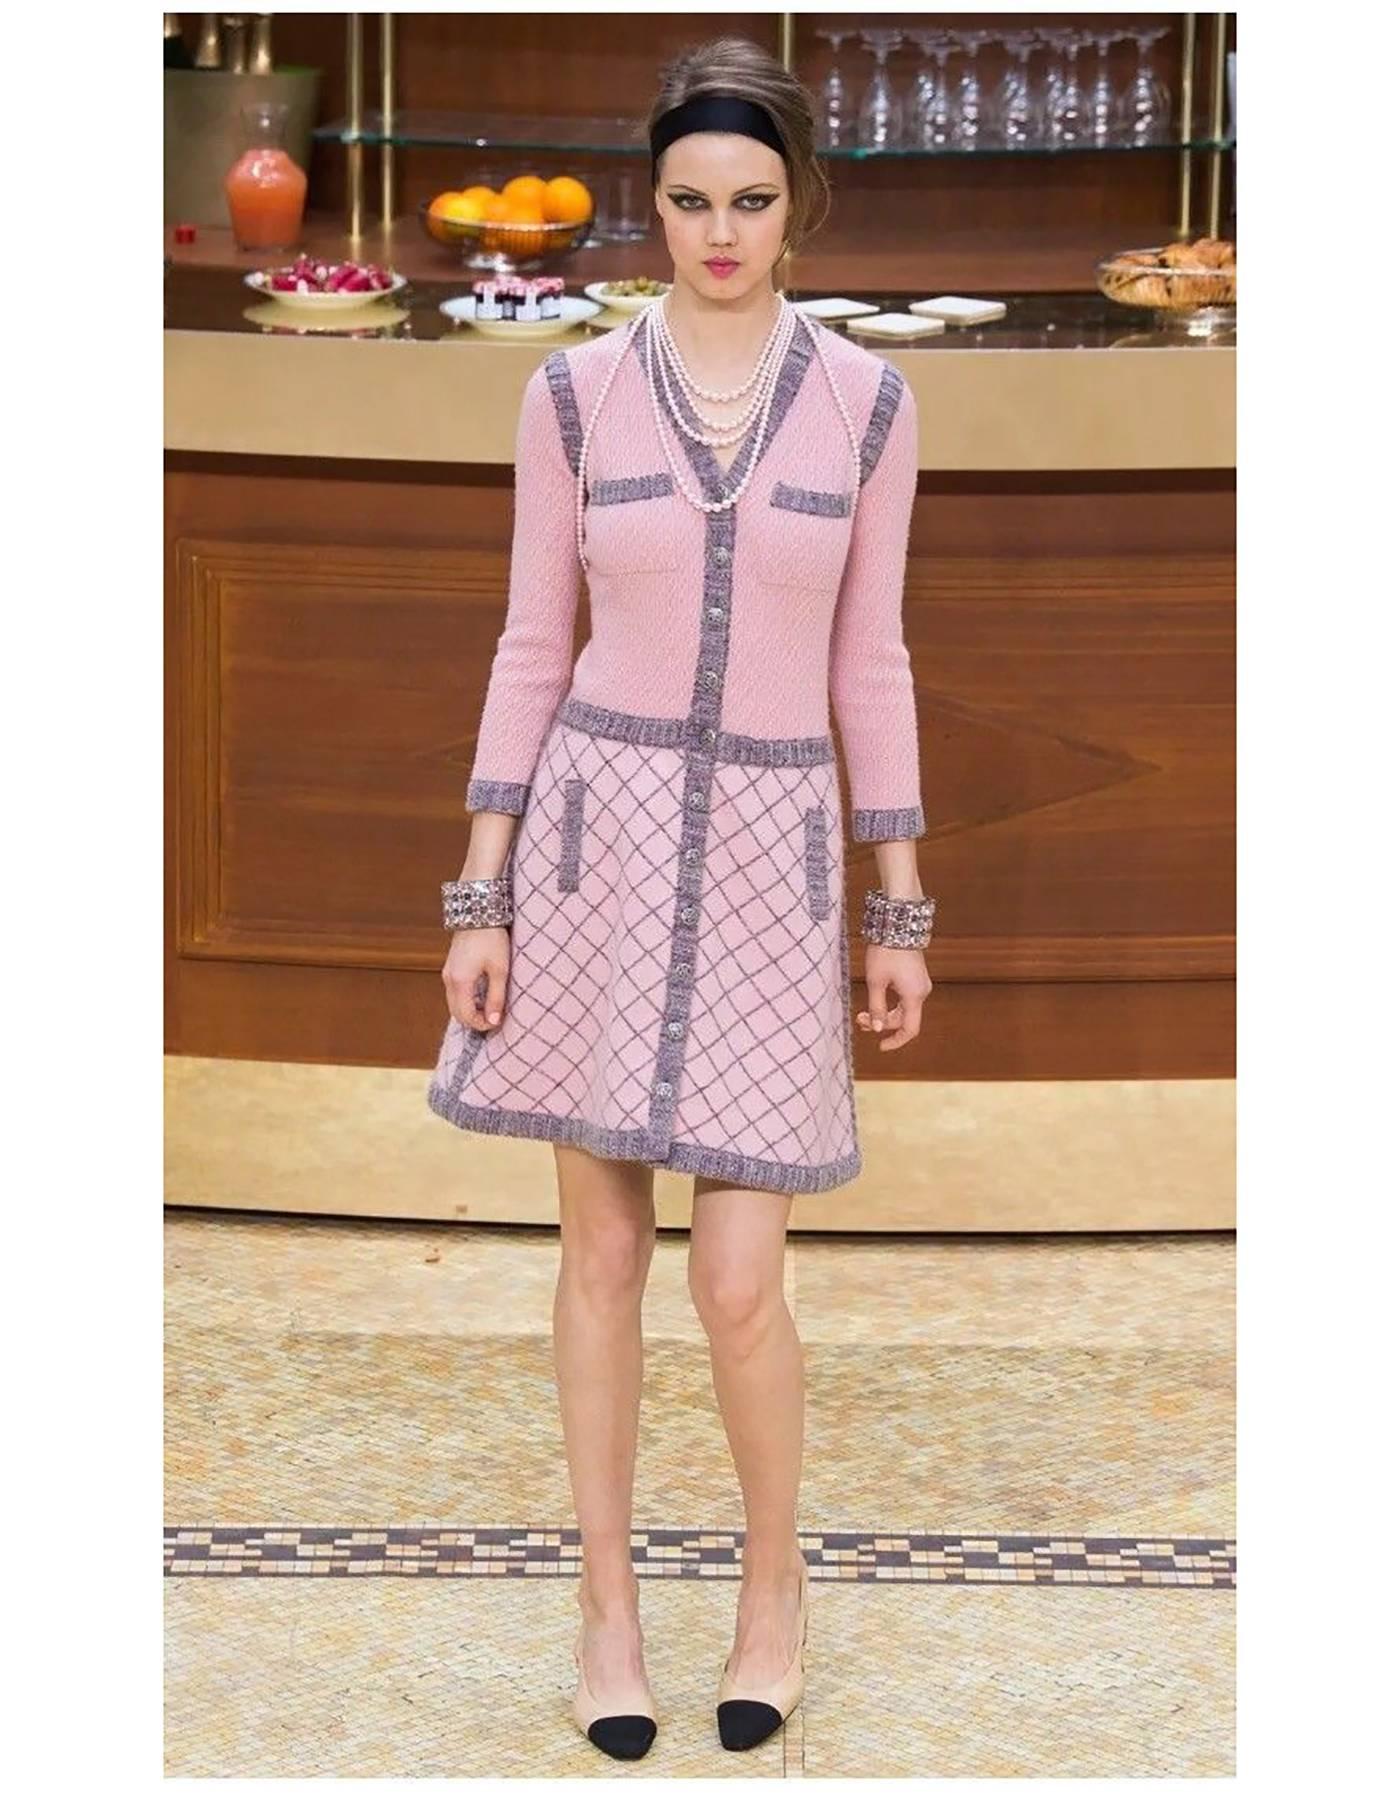 Chanel Pink Silk & Cashmere Sweater Coat Sz FR40

Made In: Italy
Year Of Production: 2015
Color: Pink
Materials: 50% silk, 50% cashmere, 10% mohair
Lining: None
Closure/Opening: Front camellia button closure
Exterior Pockets: Four front